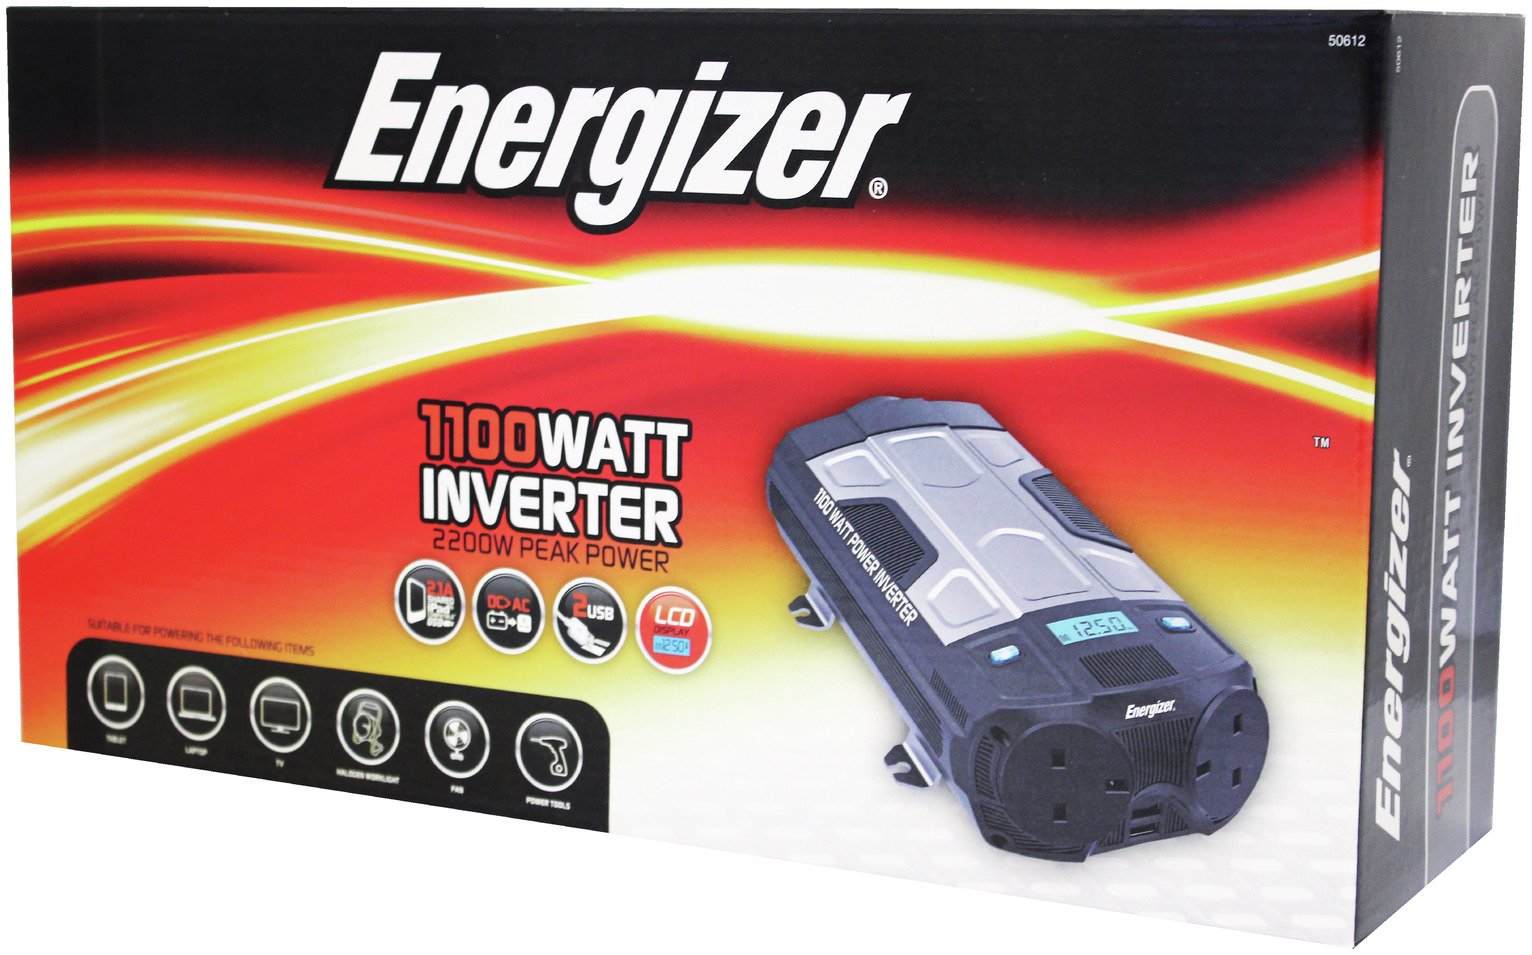 Energizer 1100W Power Inverter Review